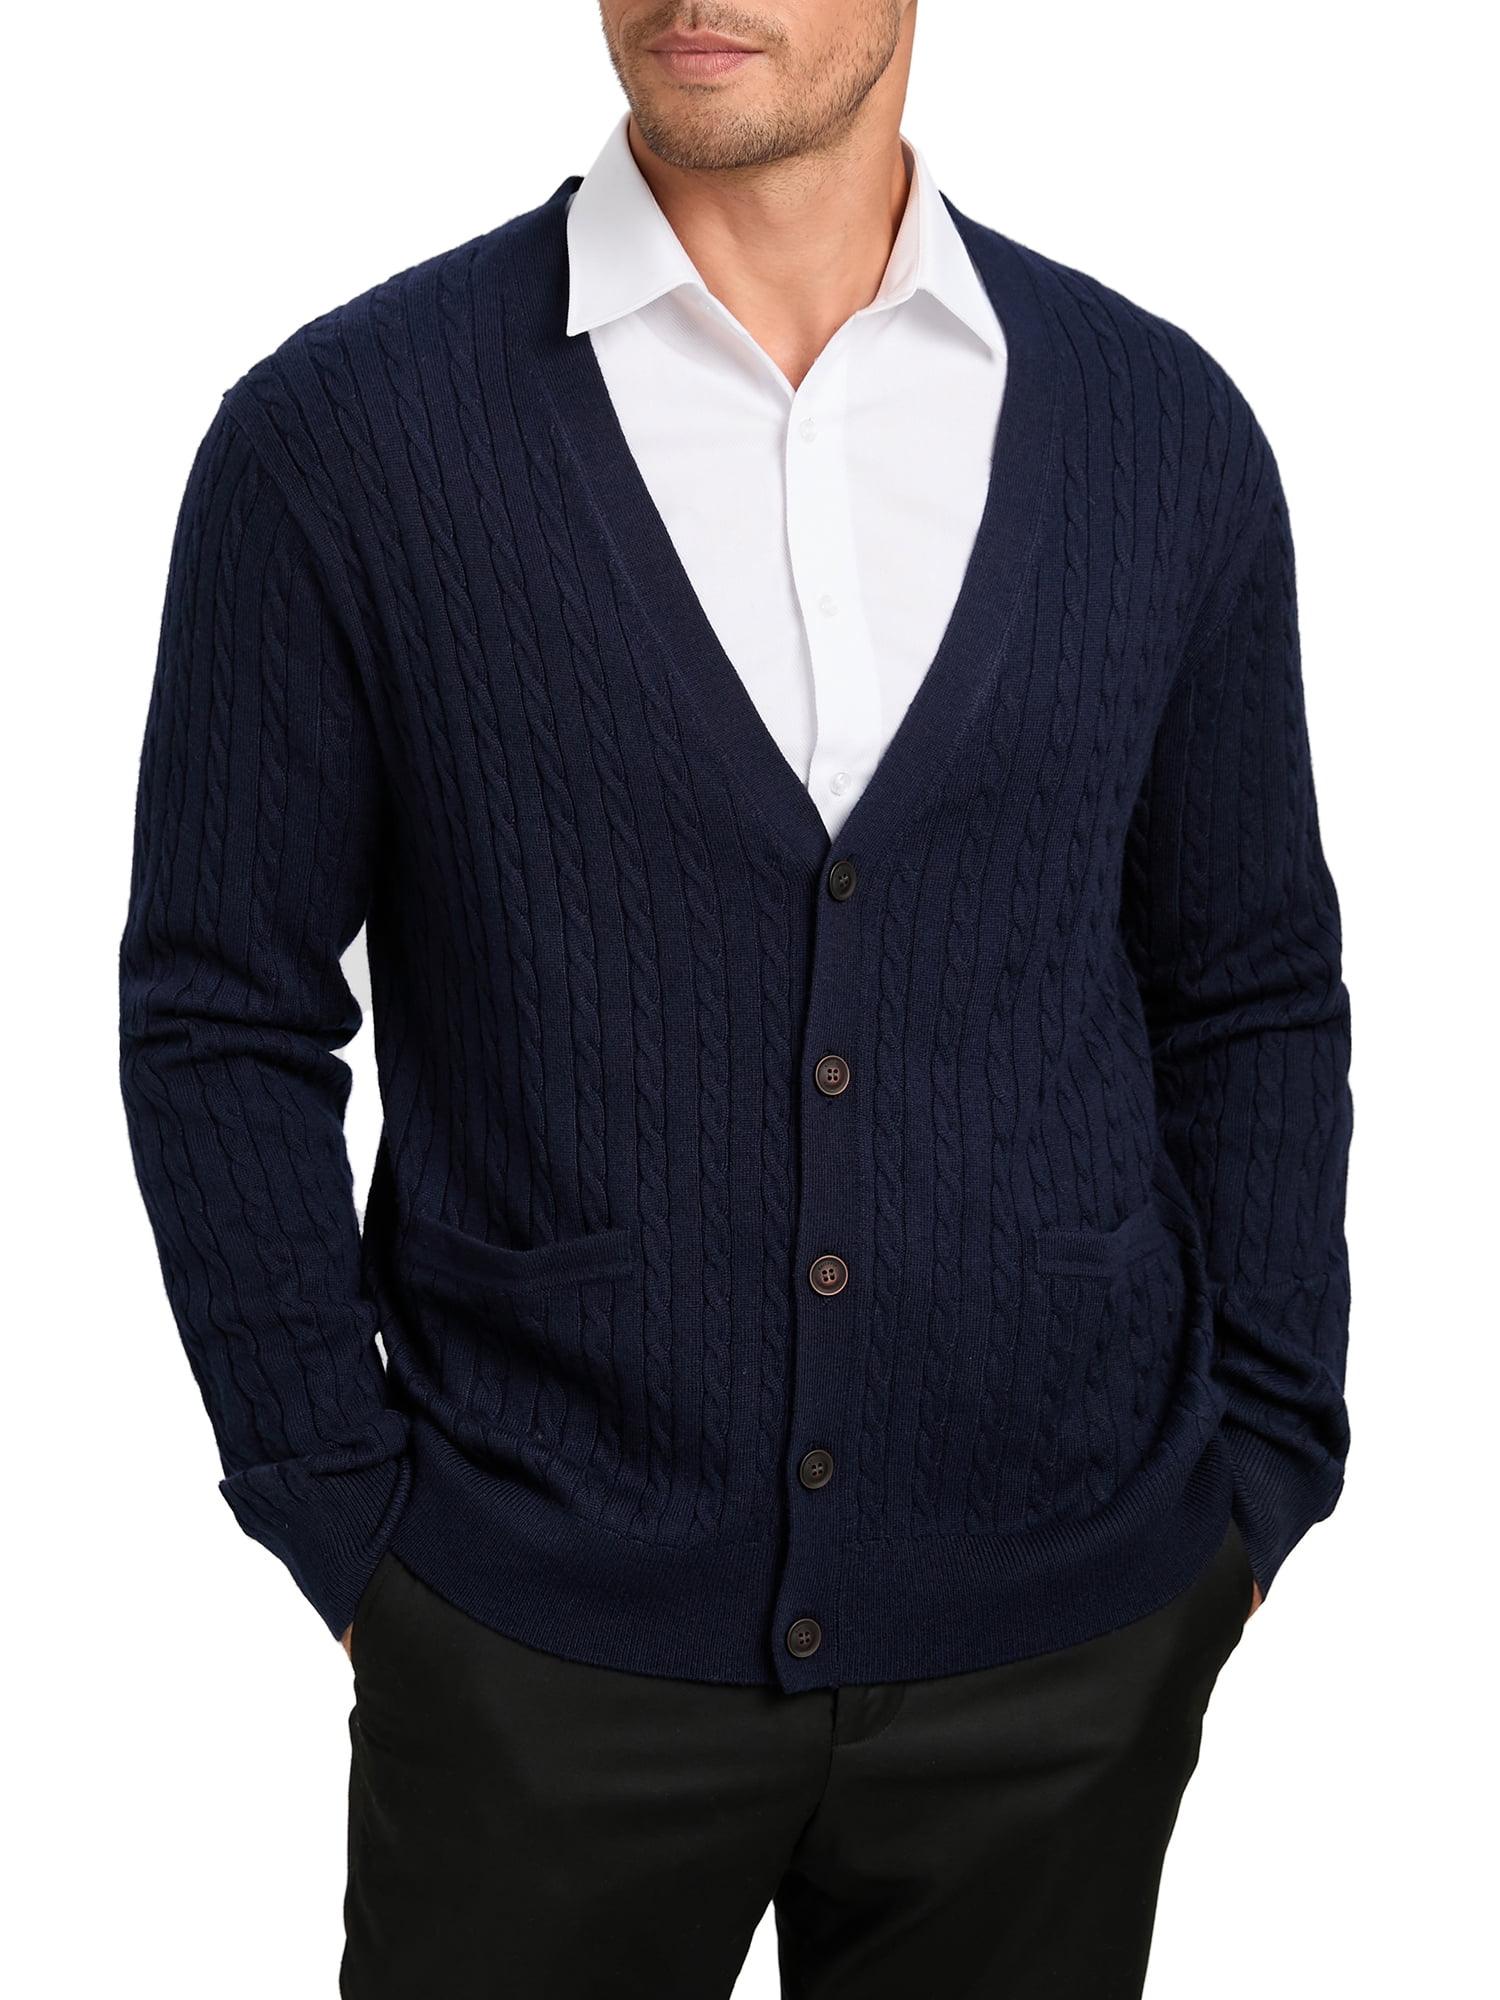 Kallspin Men’s Wool Blend V-Neck Cable-Knit Cardigans Sweaters (Navy ...